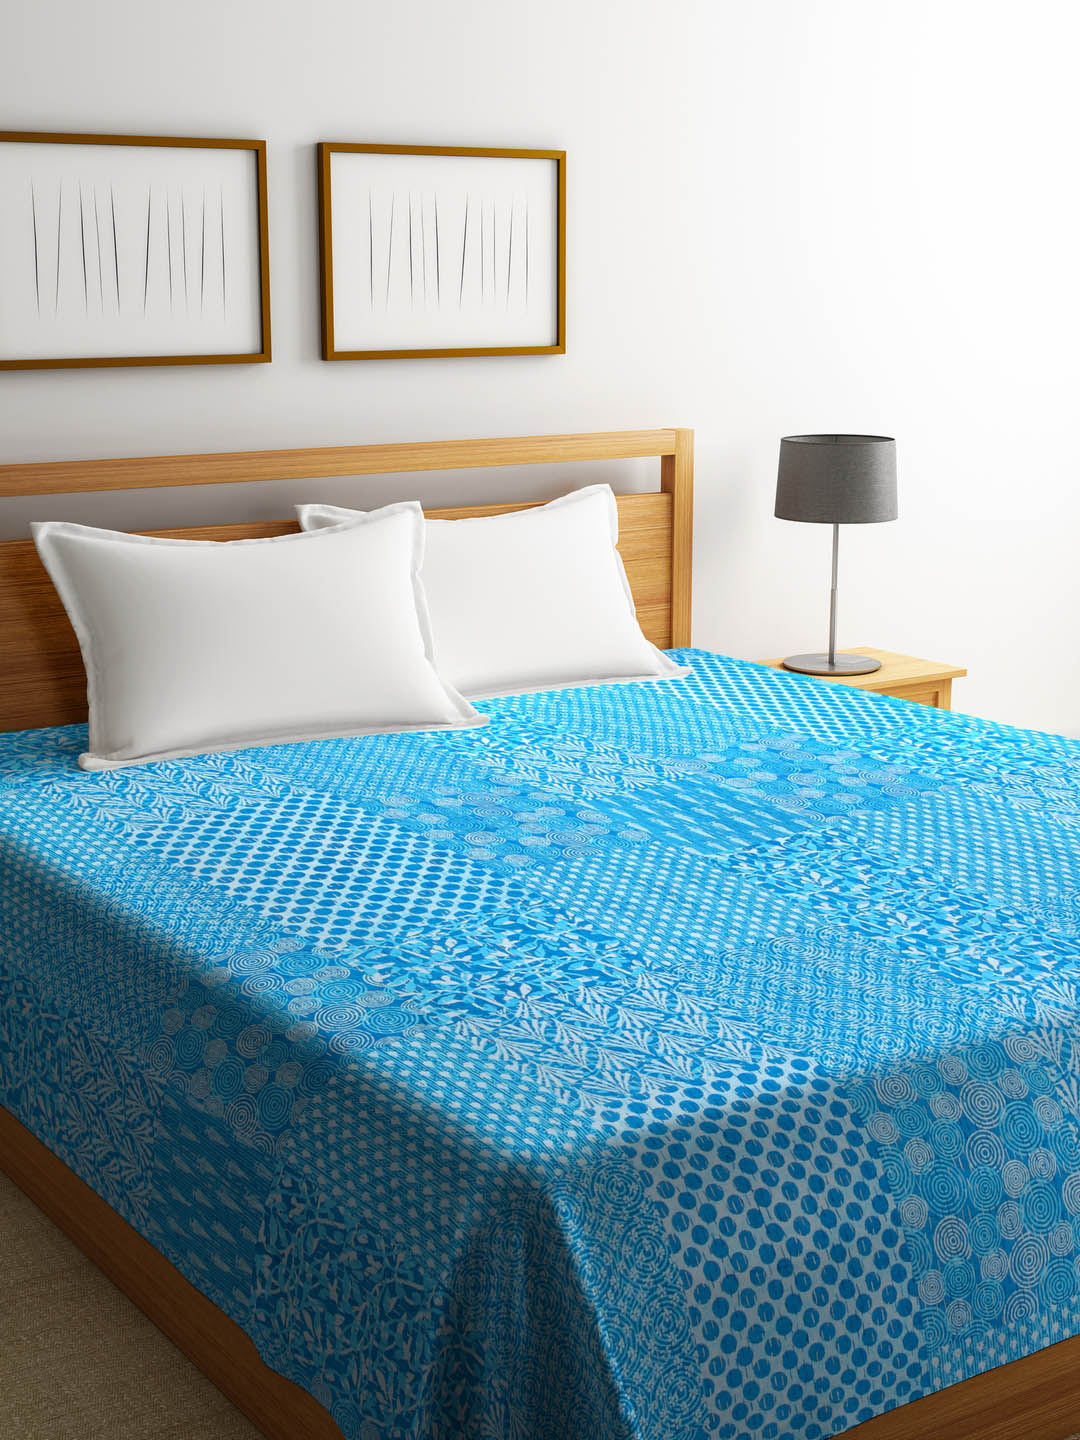 Rajasthan Decor Blue Ethnic Screen Print Kantha Work Cotton Double King Bed Cover Price in India